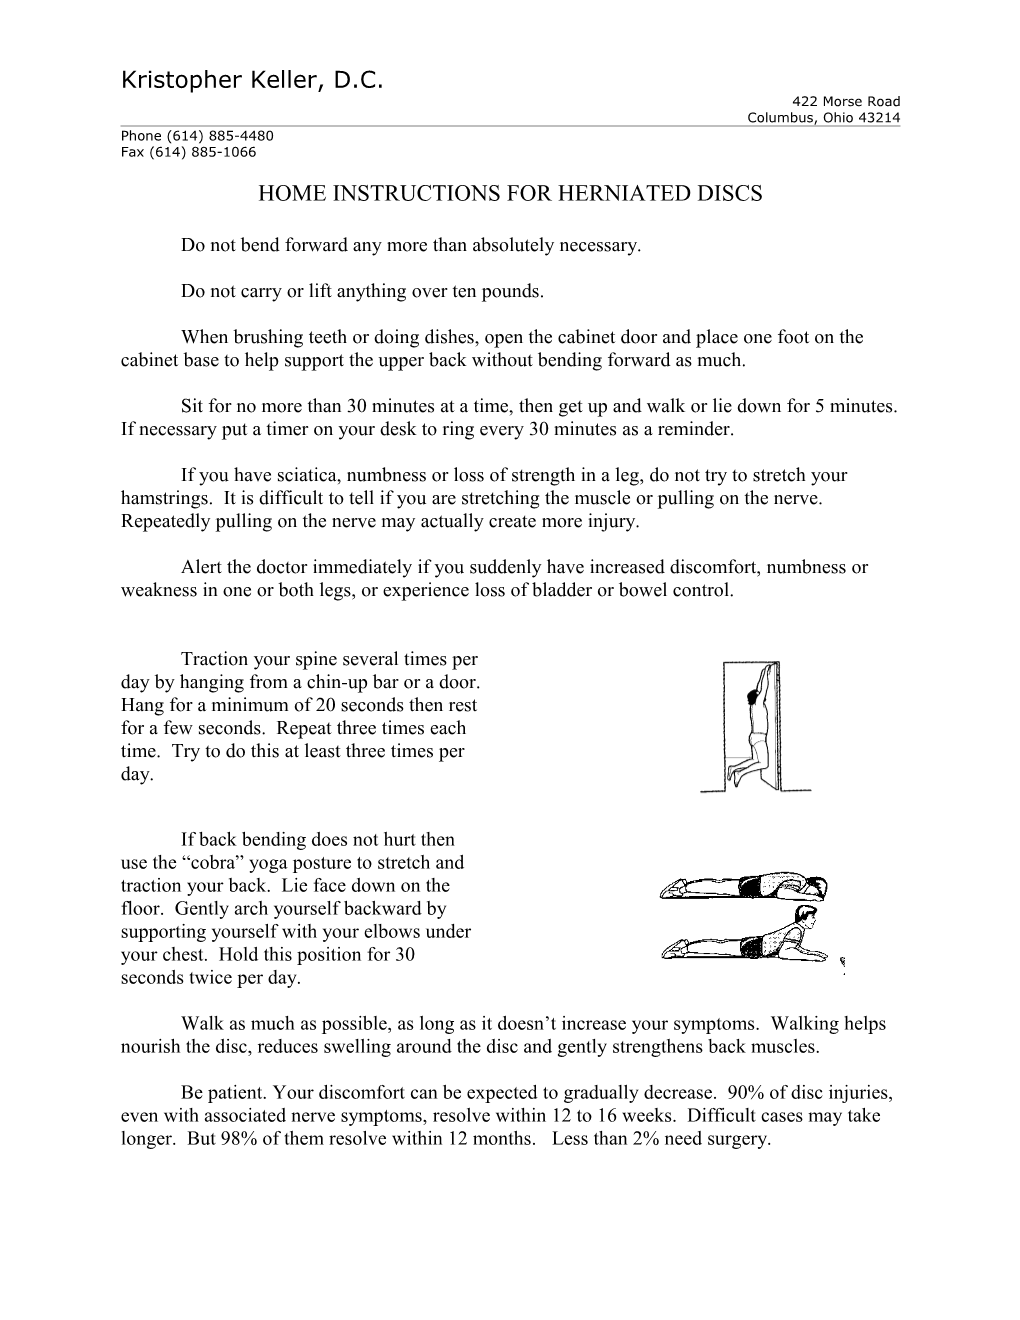 Home Instructions for Herniated Discs